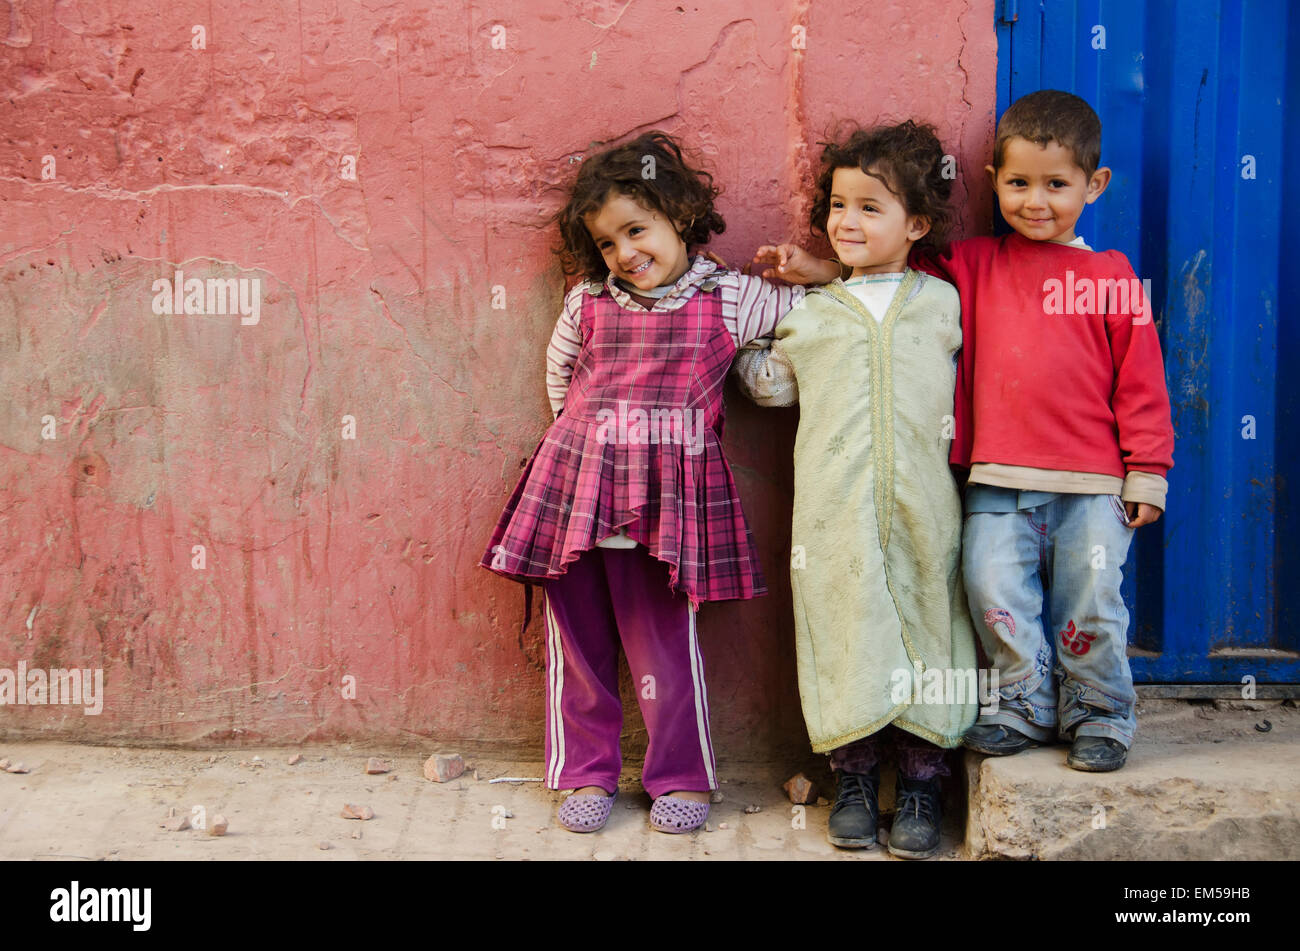 Three young children standing against wall; Old Medina, Casablanca, Morocco Stock Photo